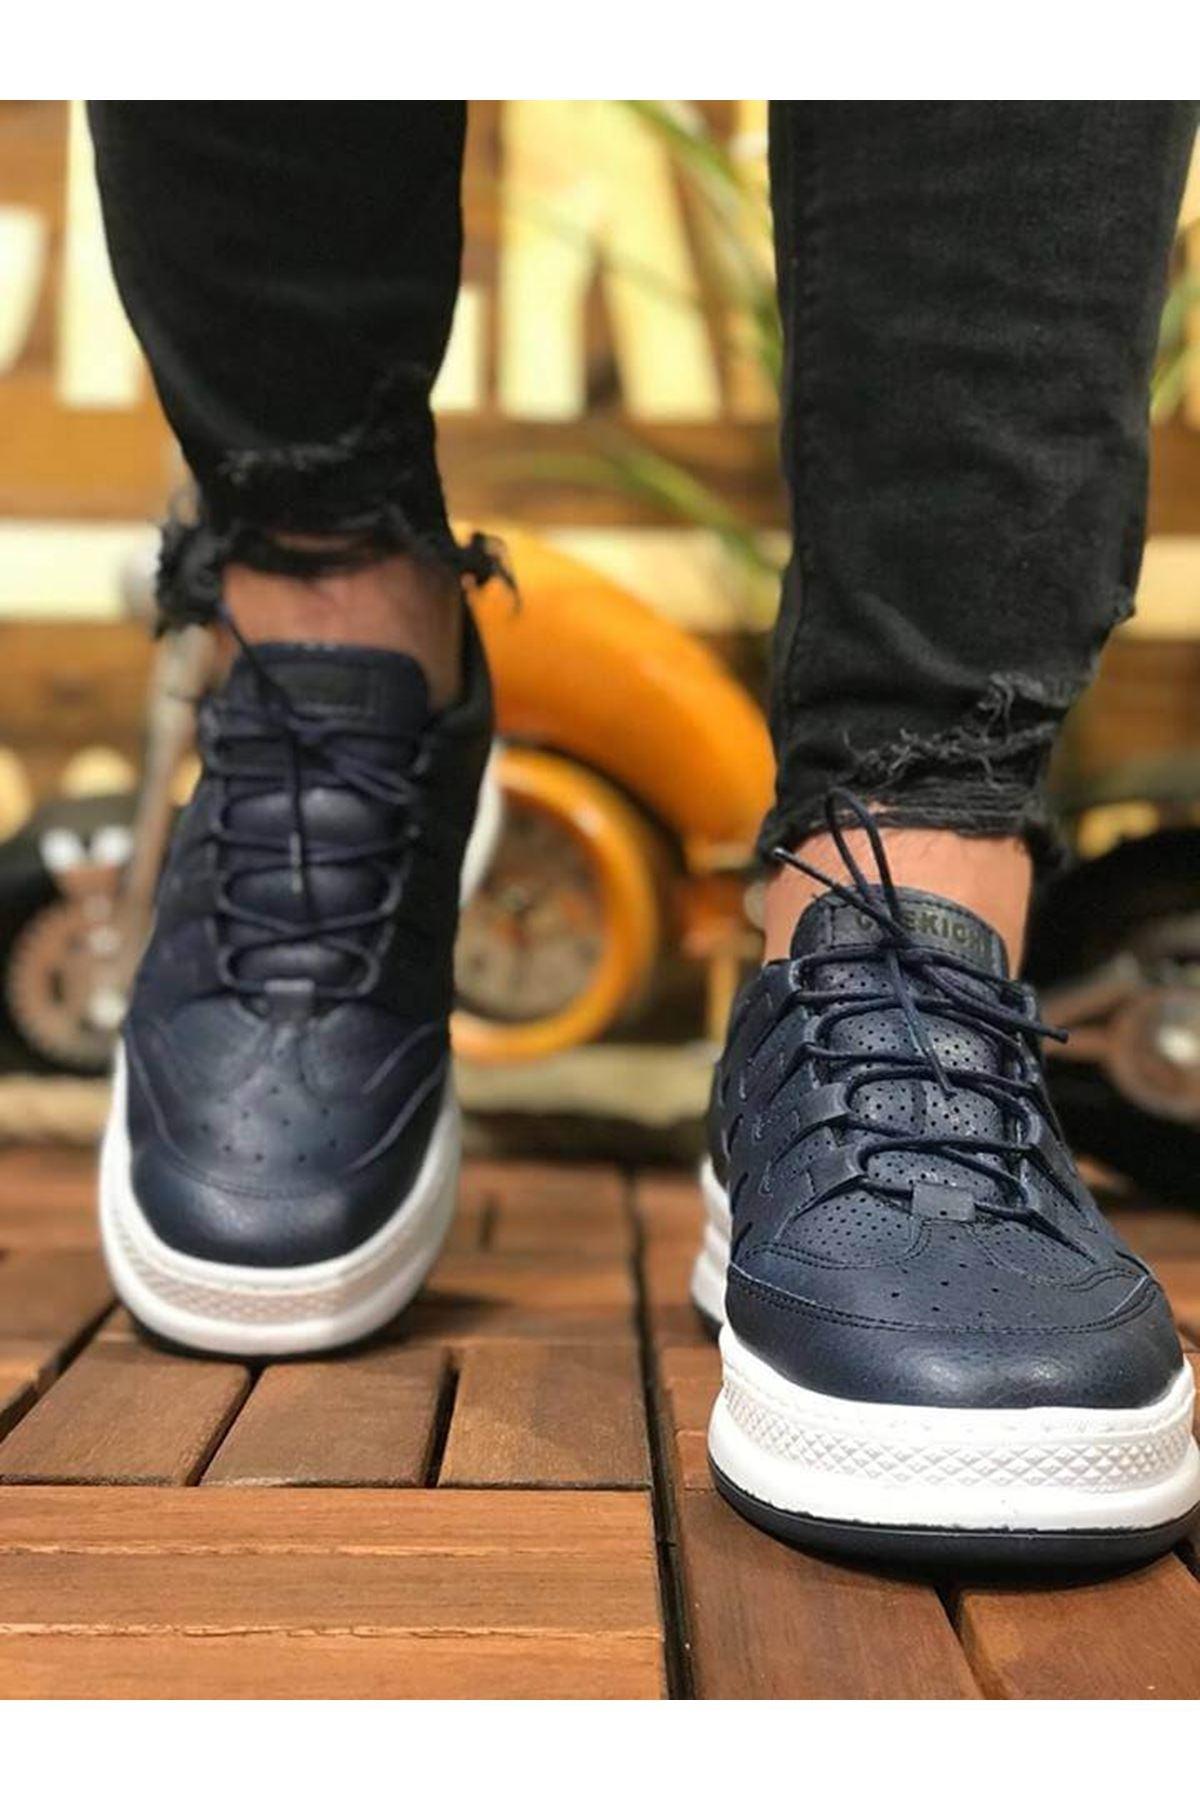 CH040 Men's Unisex Orthopedics Navy Blue-White Sole Casual Sneaker Sports Shoes - STREET MODE ™